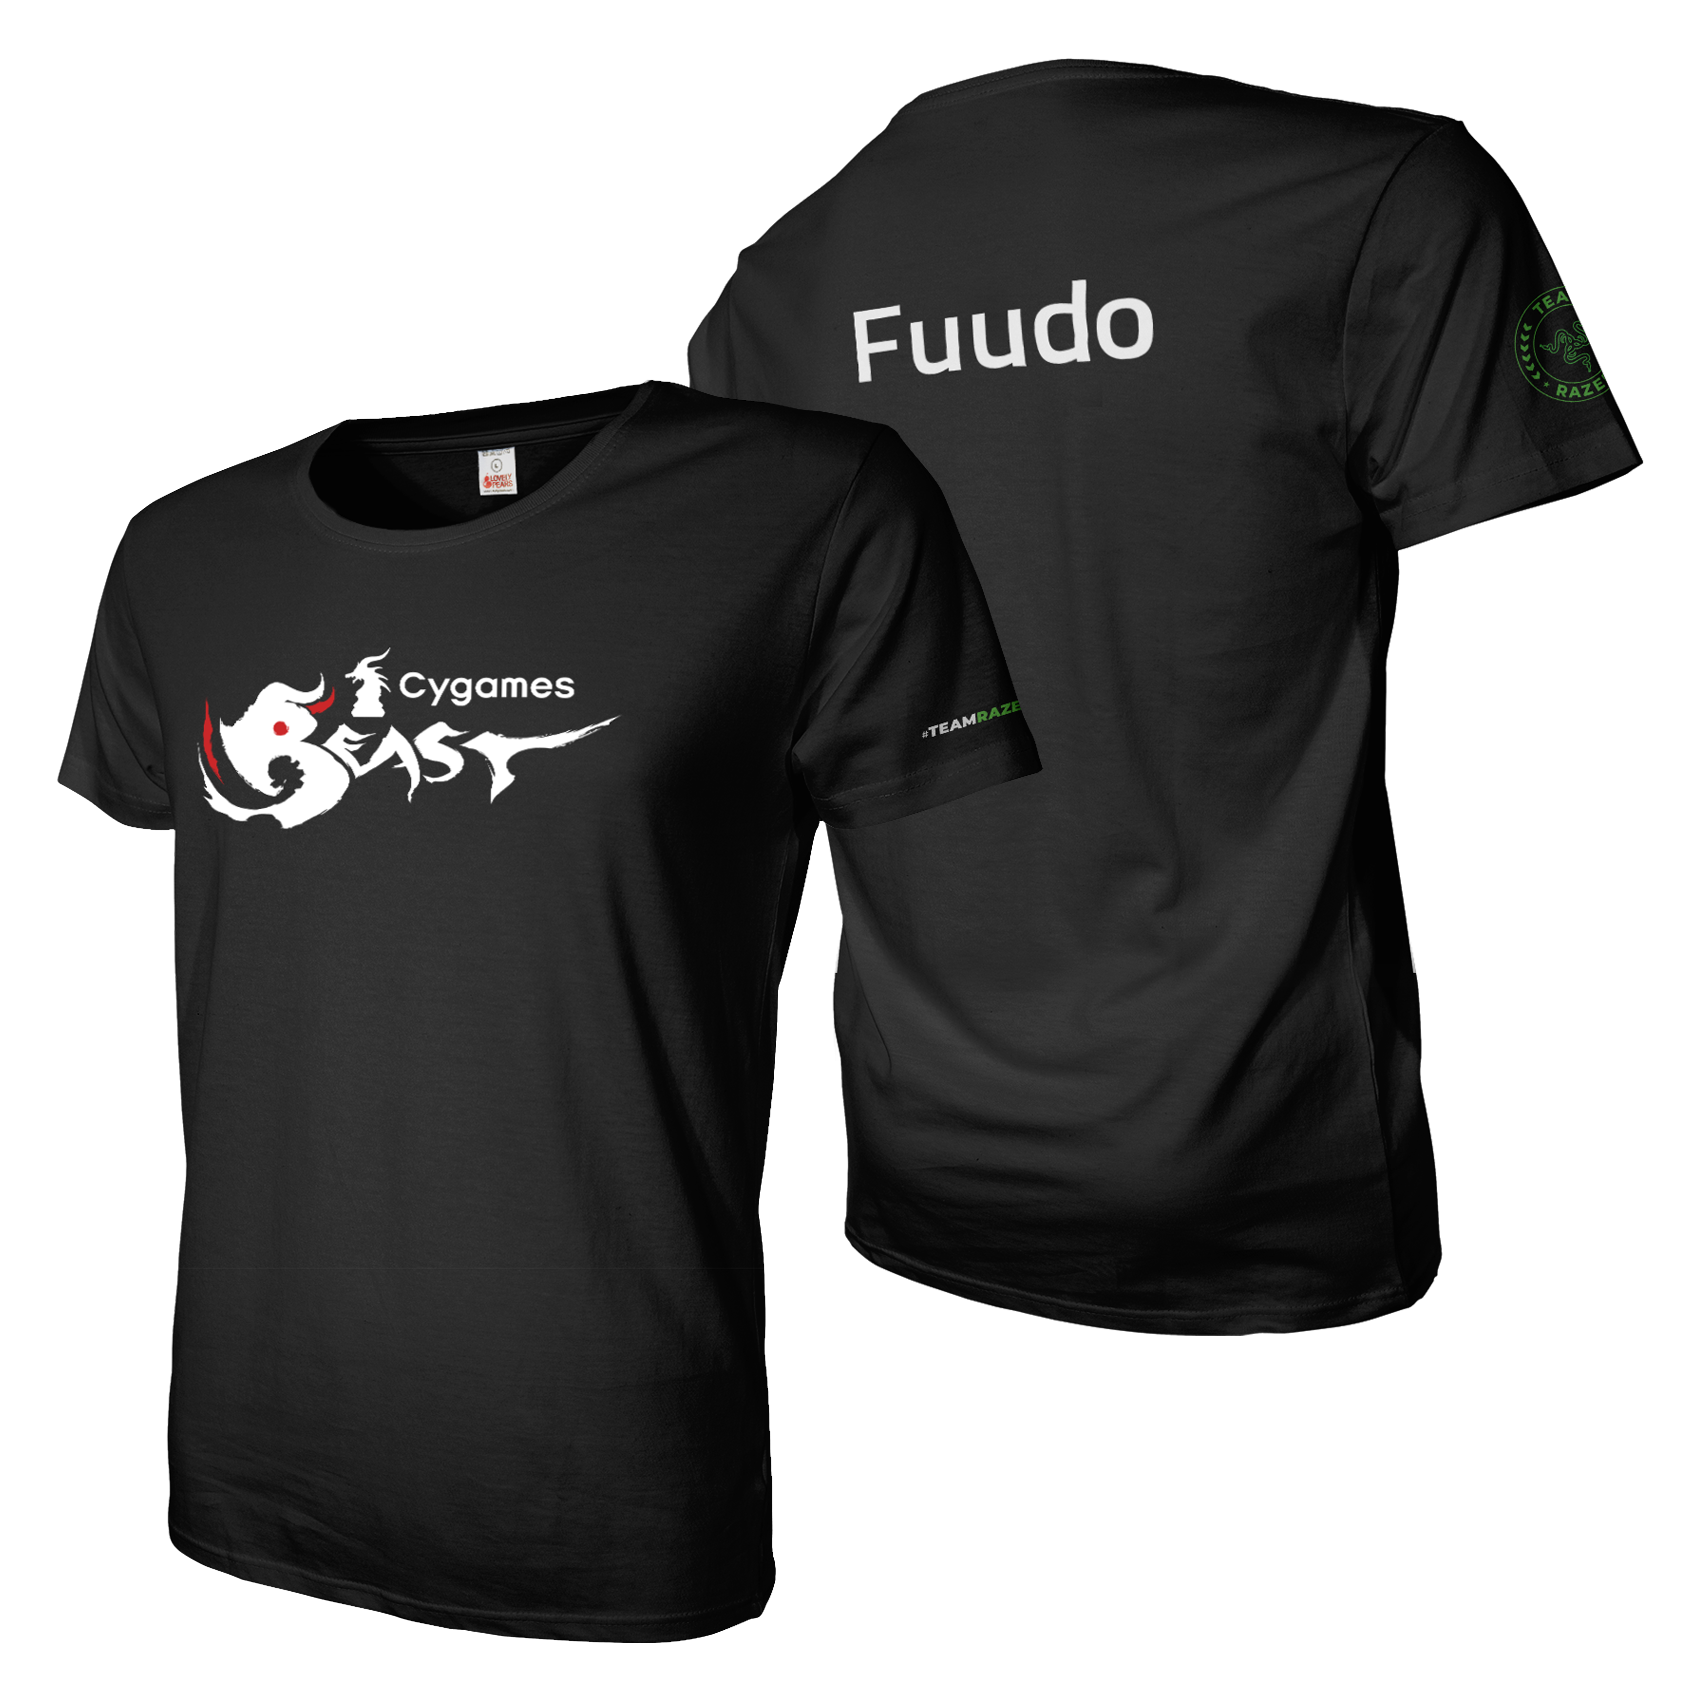 Black tee shirt with A4 cygames beast front and back custom name, Razer branding on sleeves